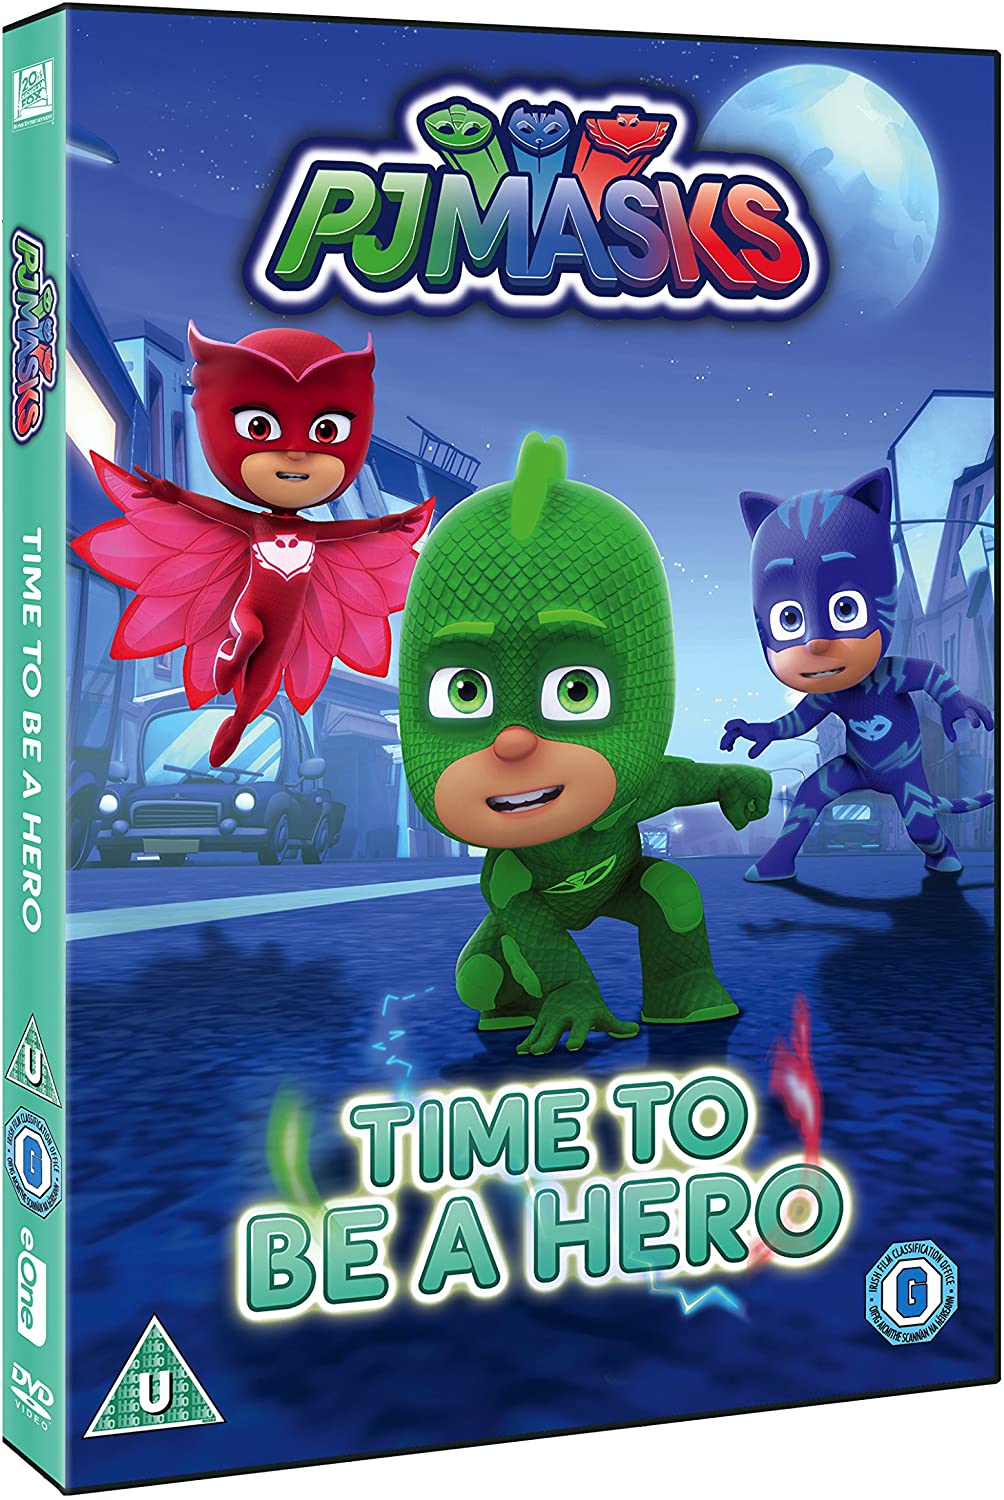 Pj Masks - Time To Be A Hero [DVD] [2017]